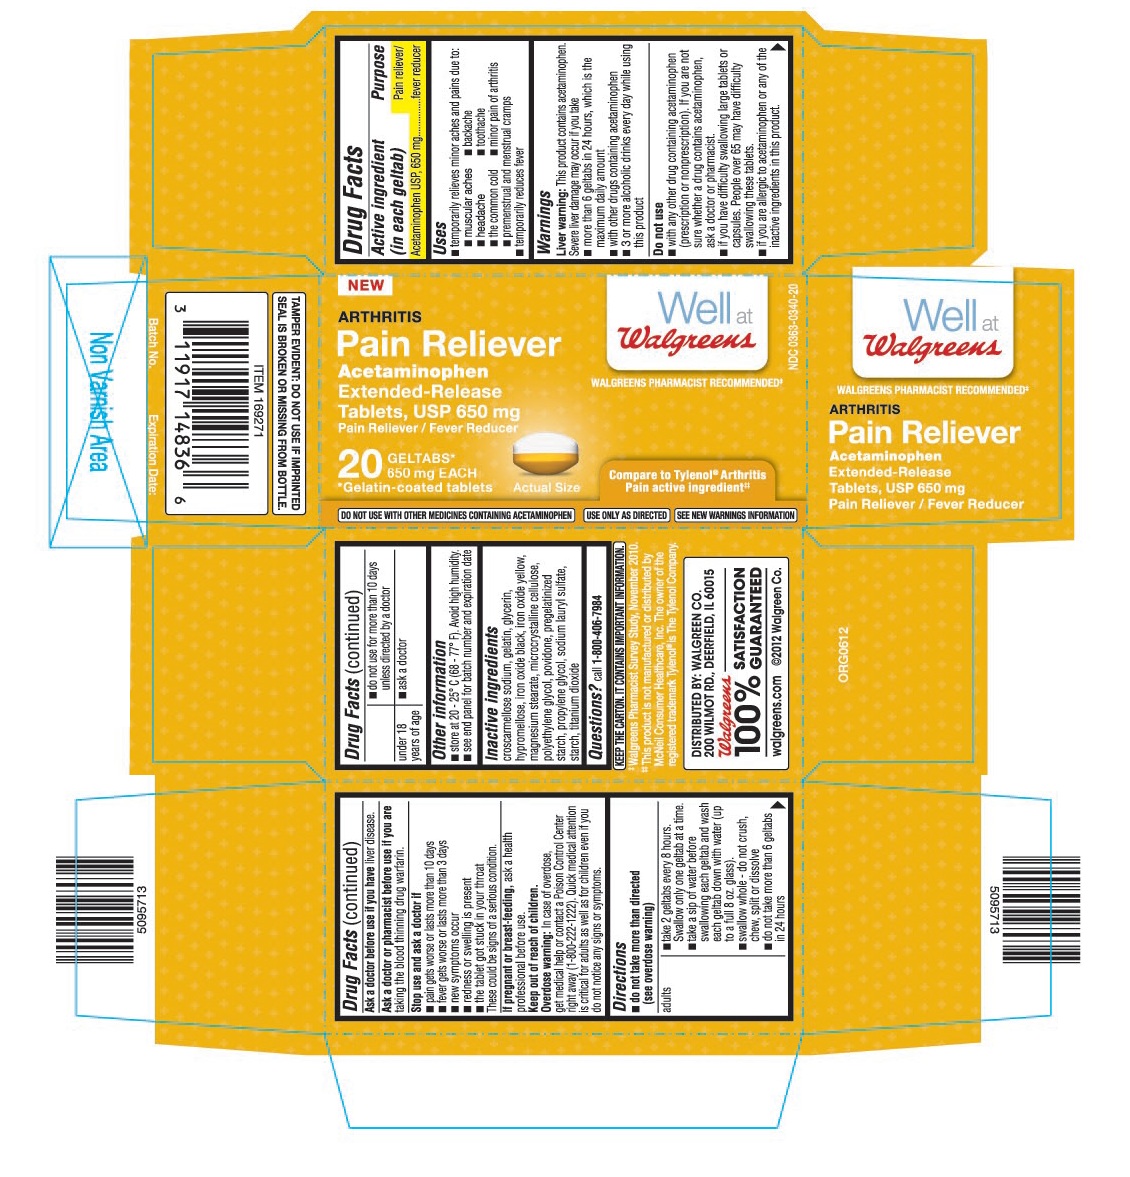 This is the 20 count blister carton label for Walgreens Acetaminophen extended-release tablets, USP 650 mg (geltabs).